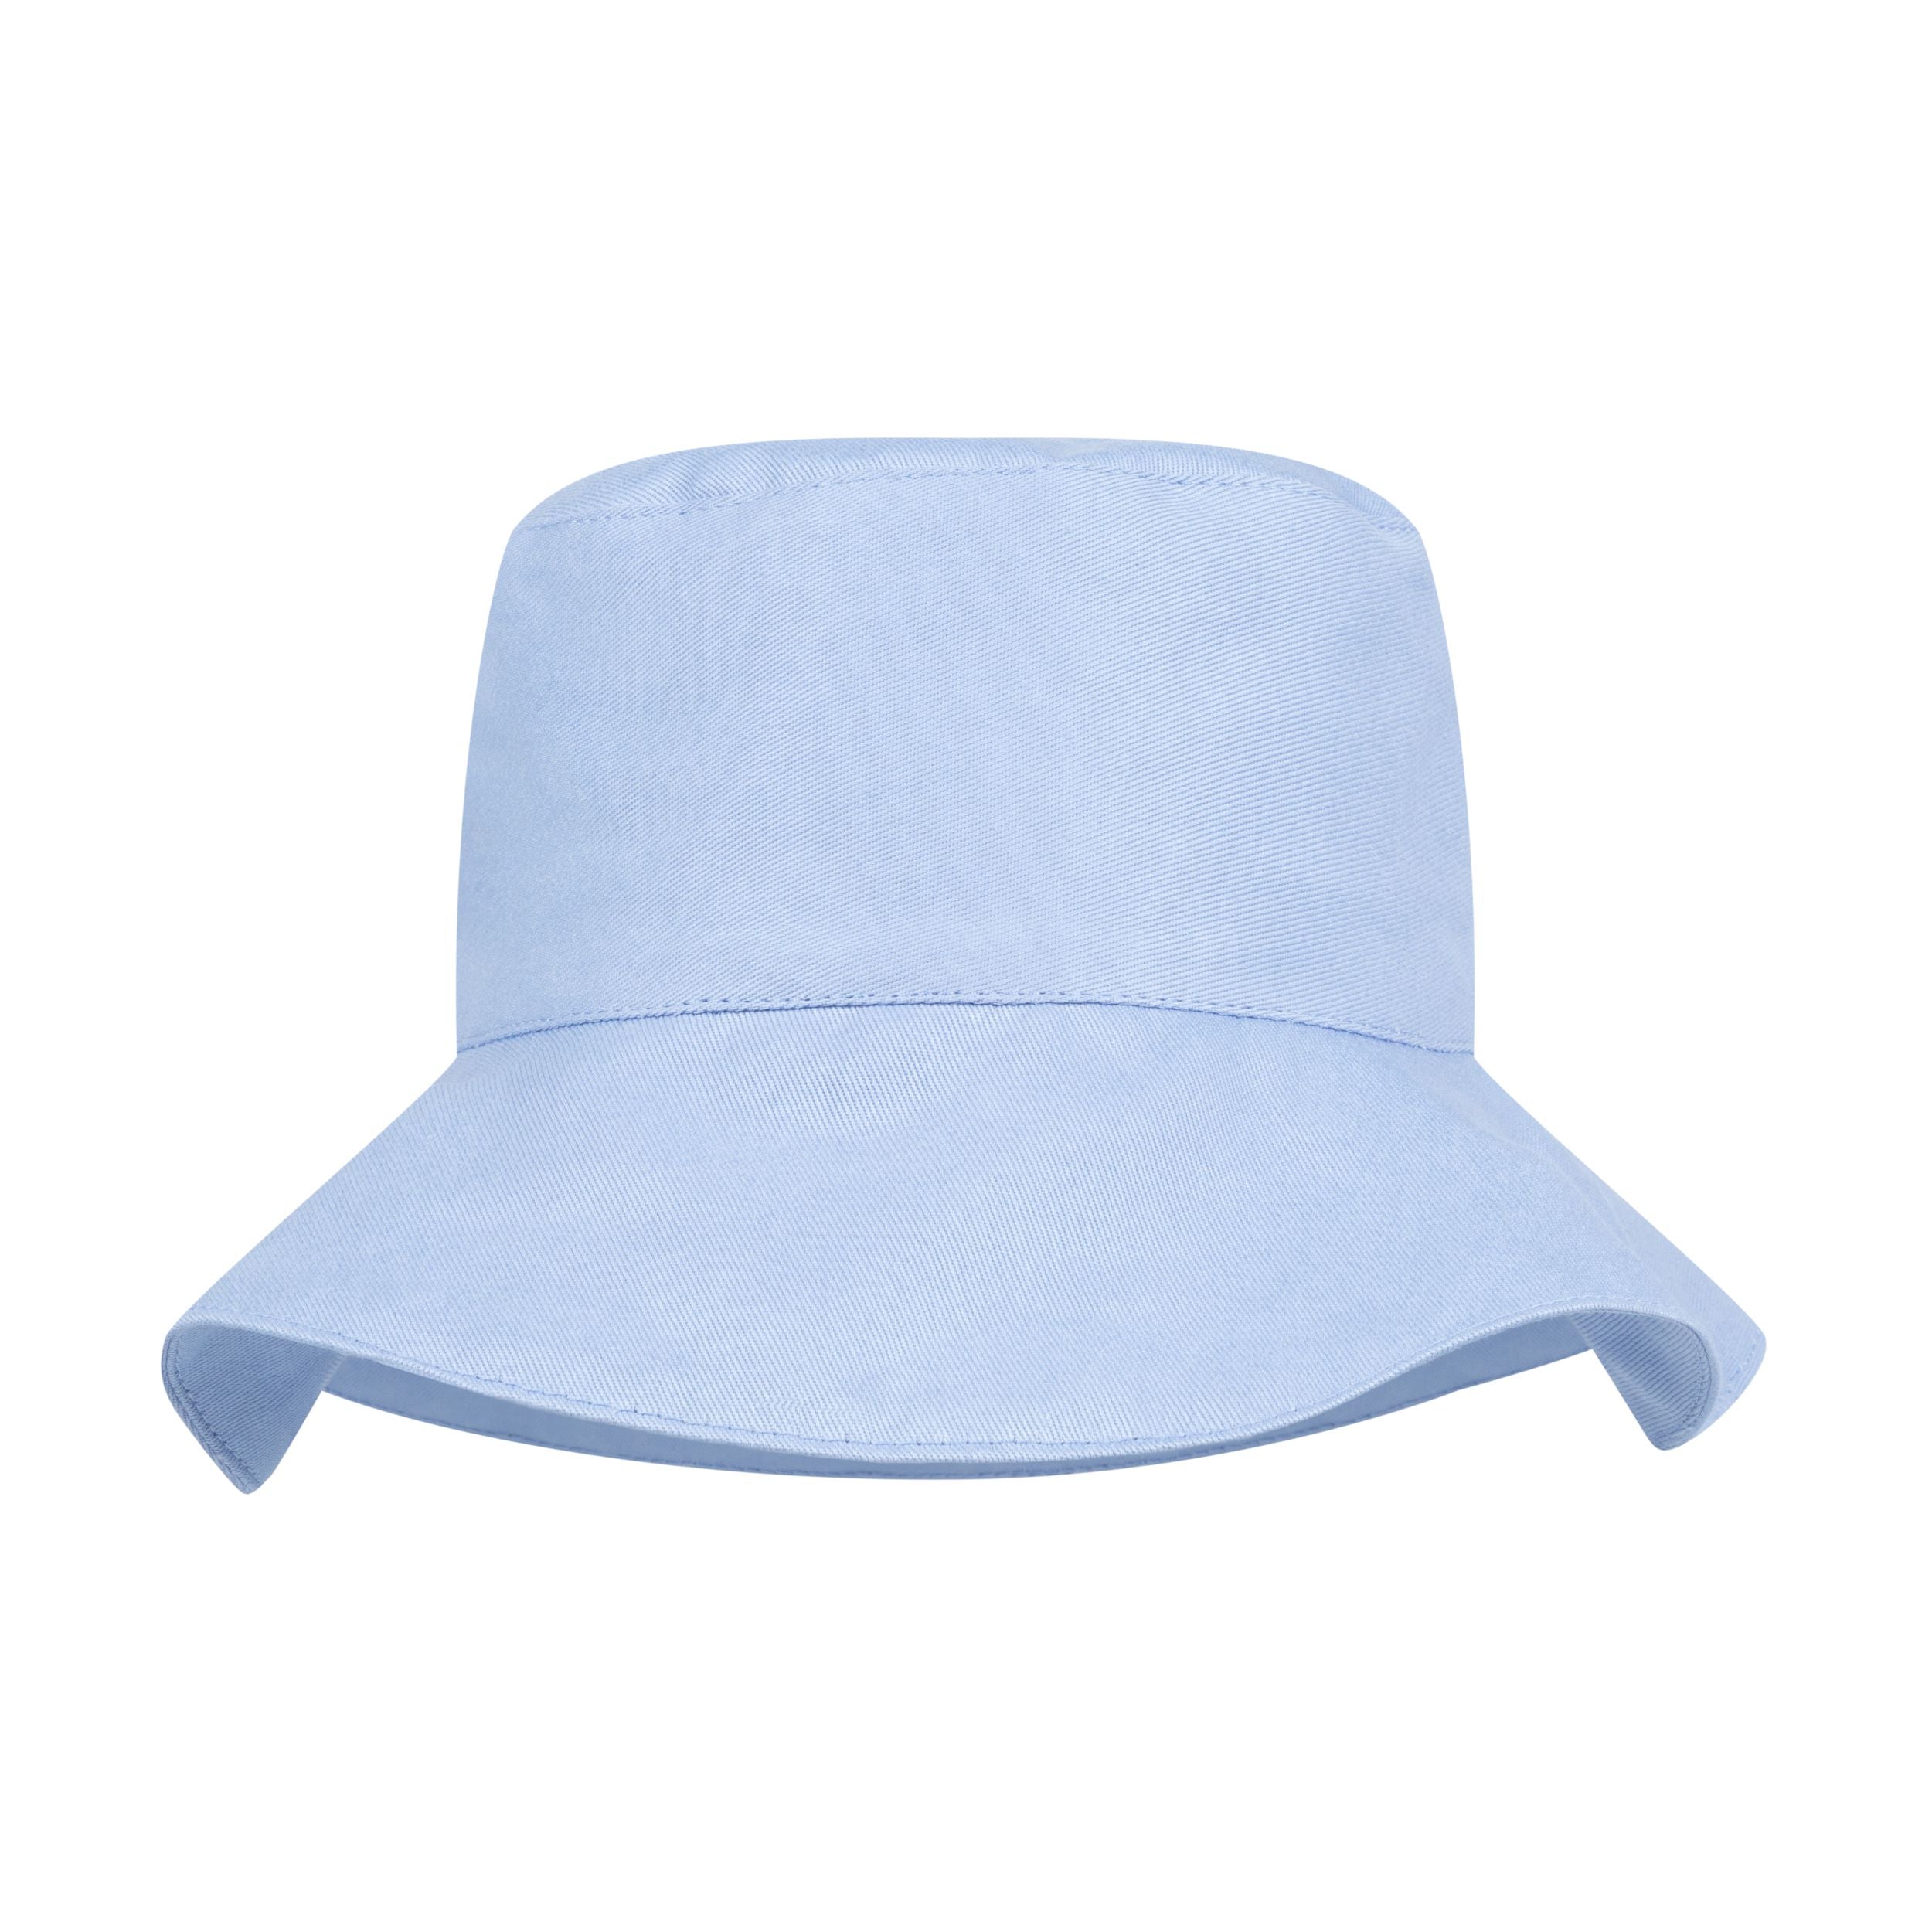 Carrier Company Cotton Sun Hat in Powder Blue